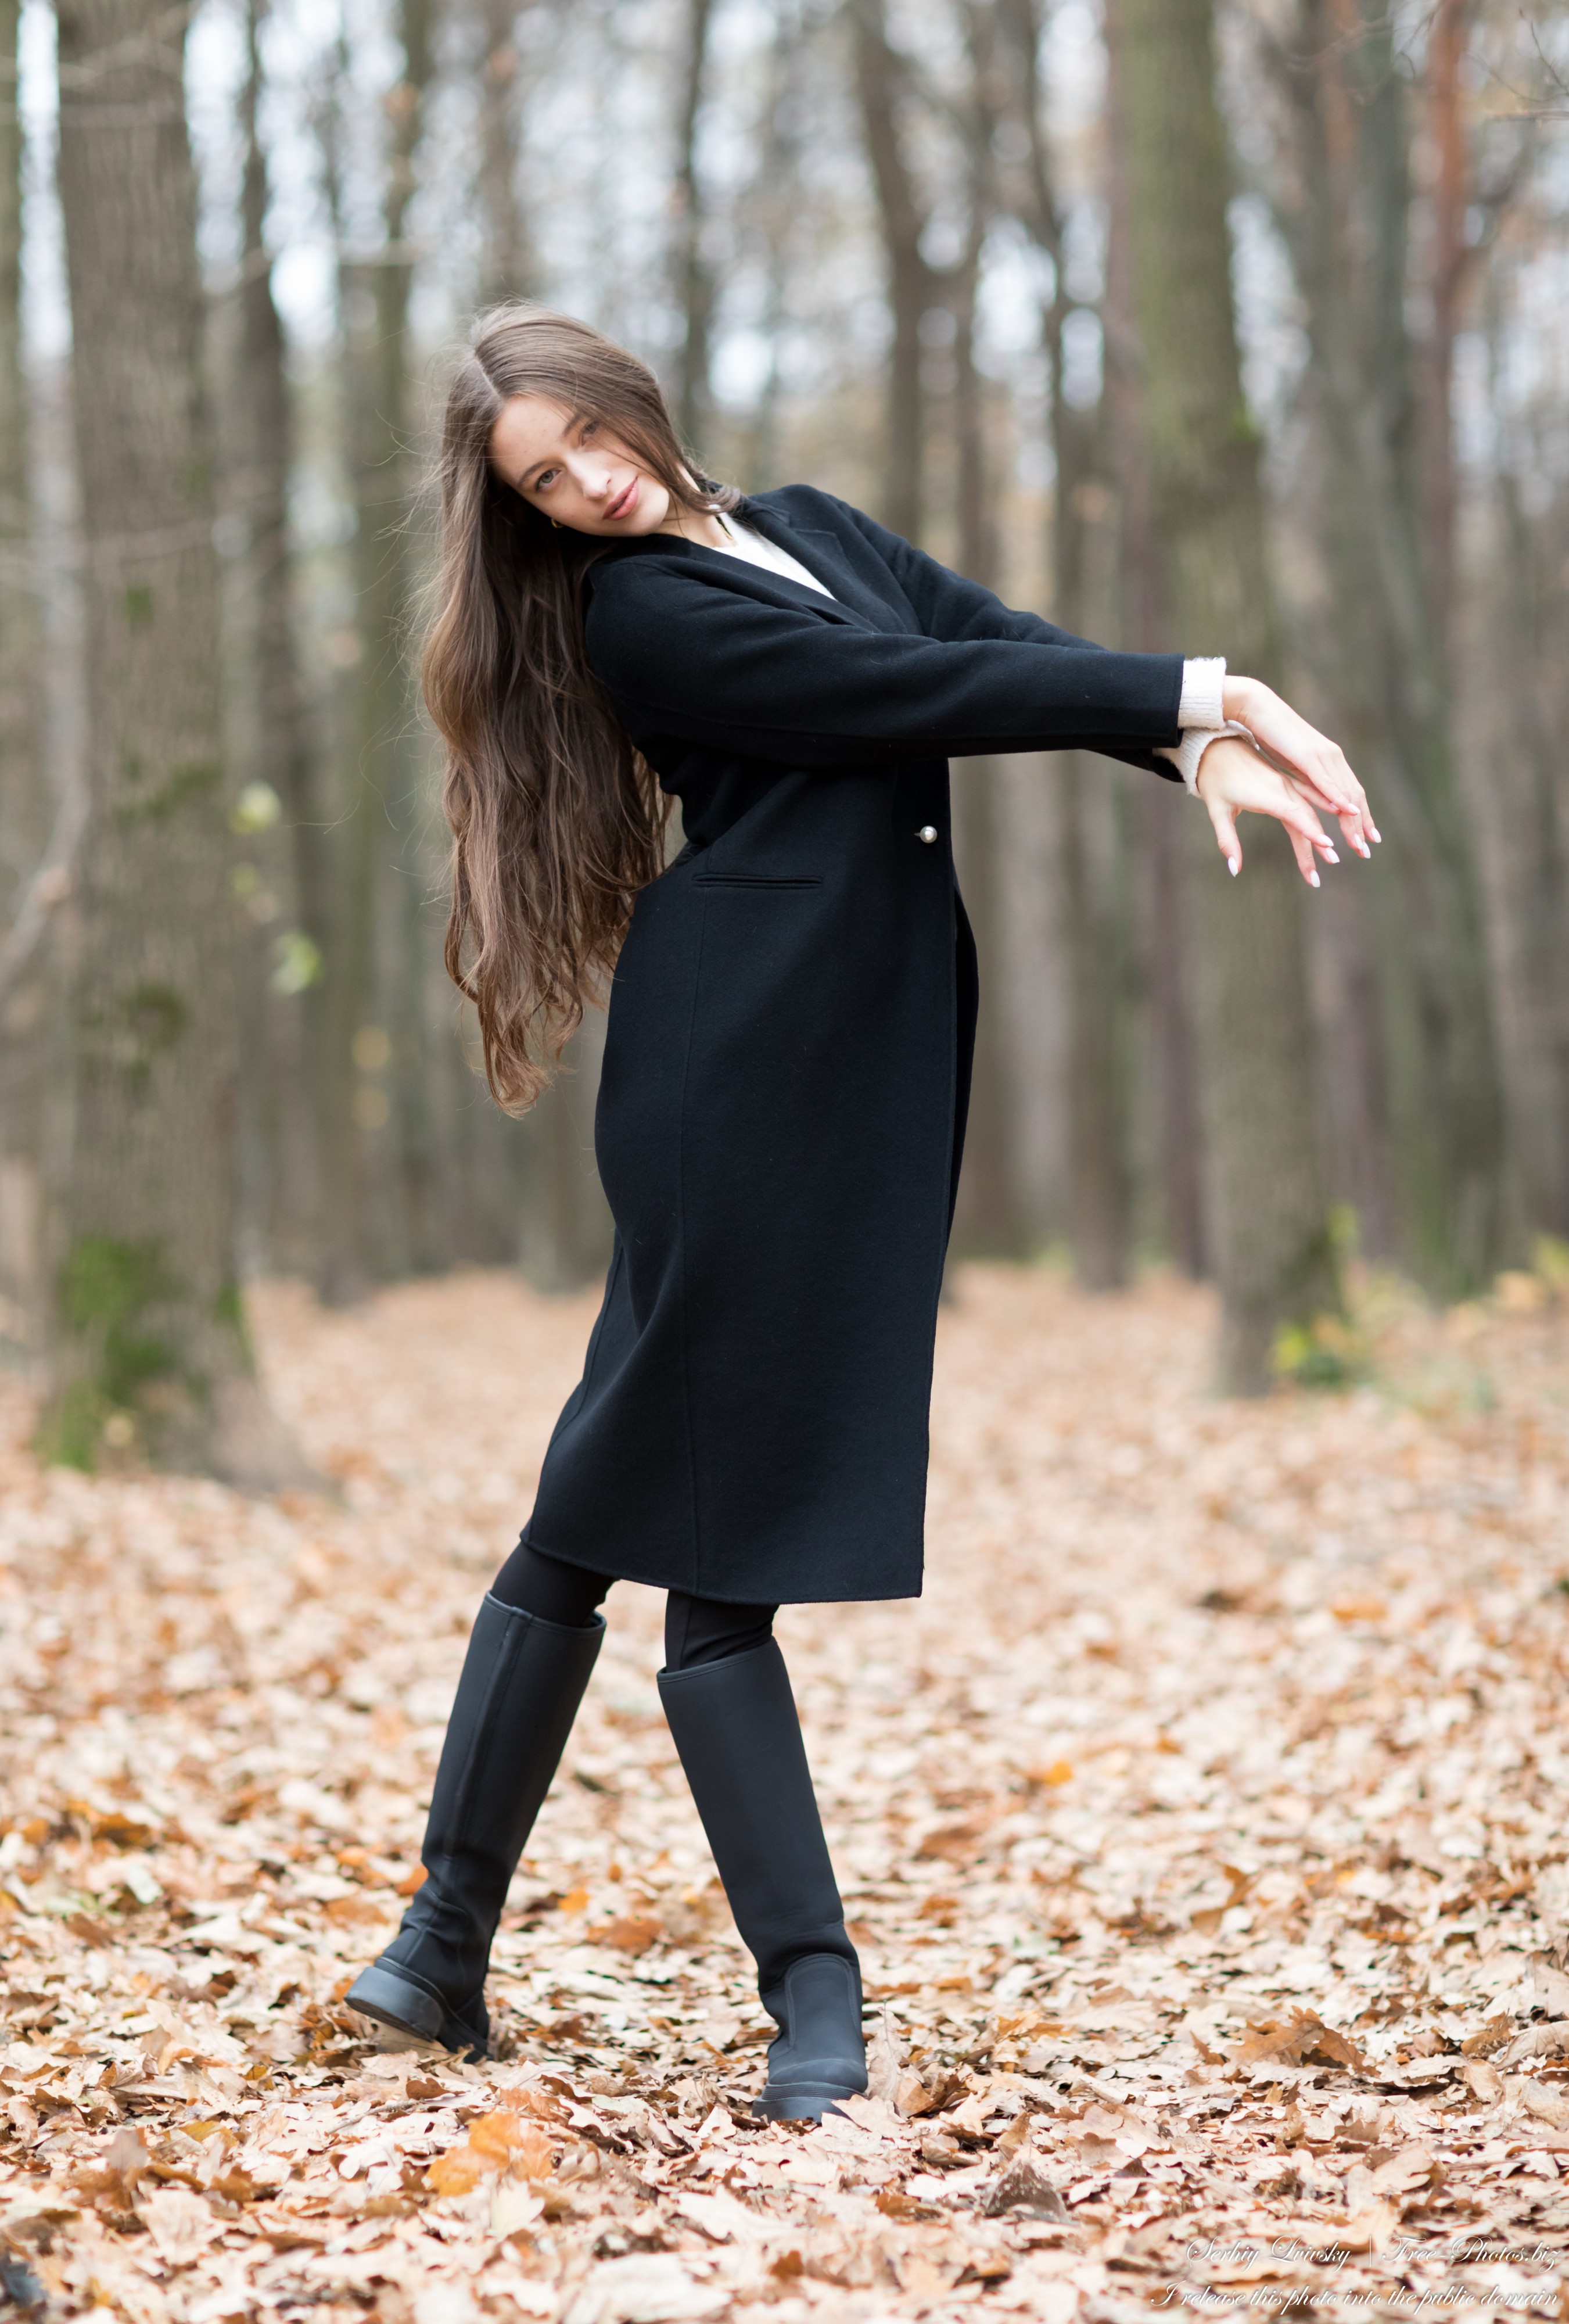 Anna - a 17-year-old ballerina photographed in November 2021 by Serhiy Lvivsky, picture 25